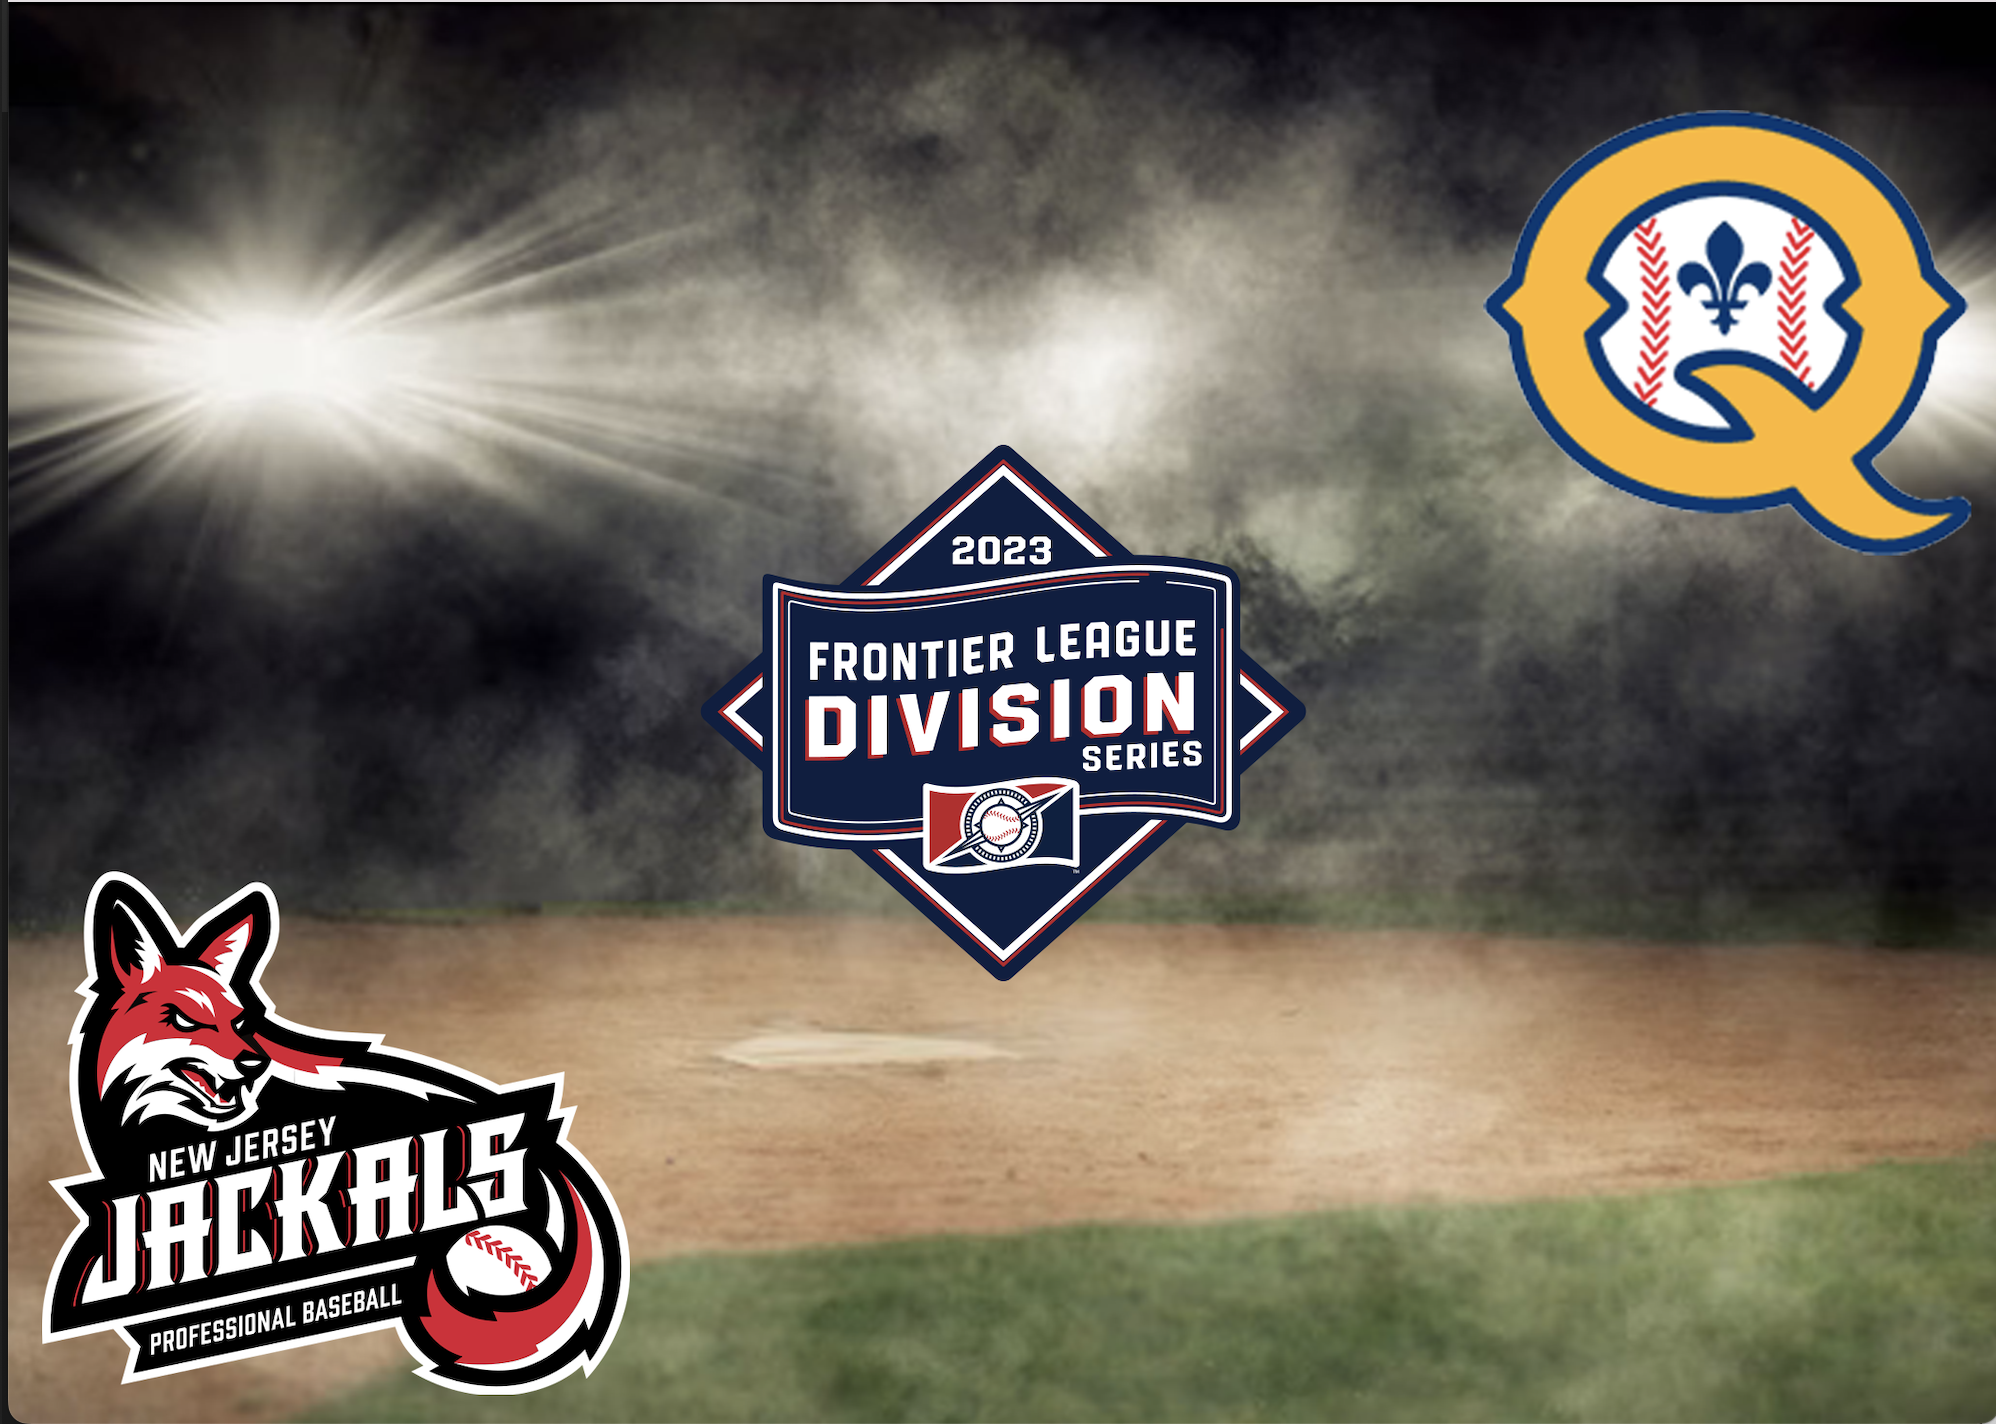 CAPITALES AND JACKALS DIVISIONAL SERIES PREVIEW